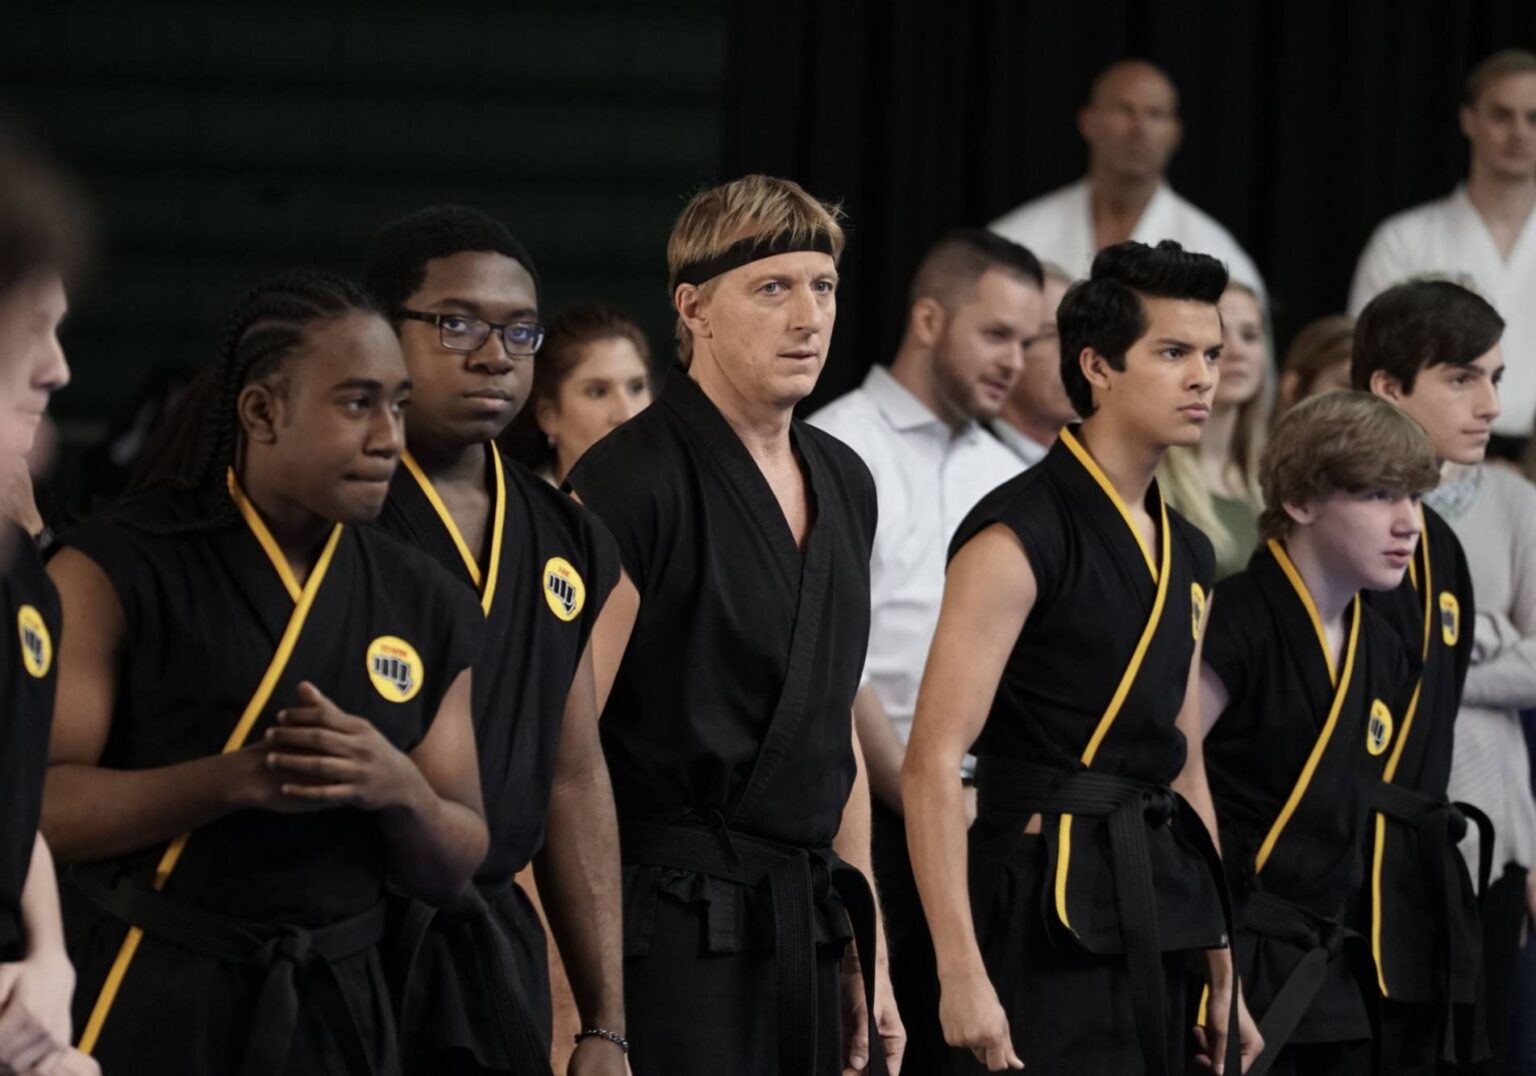 'Cobra Kai' has become extremely popular now that it's on Netflix. Here's why we all need season 3 as soon as possible.